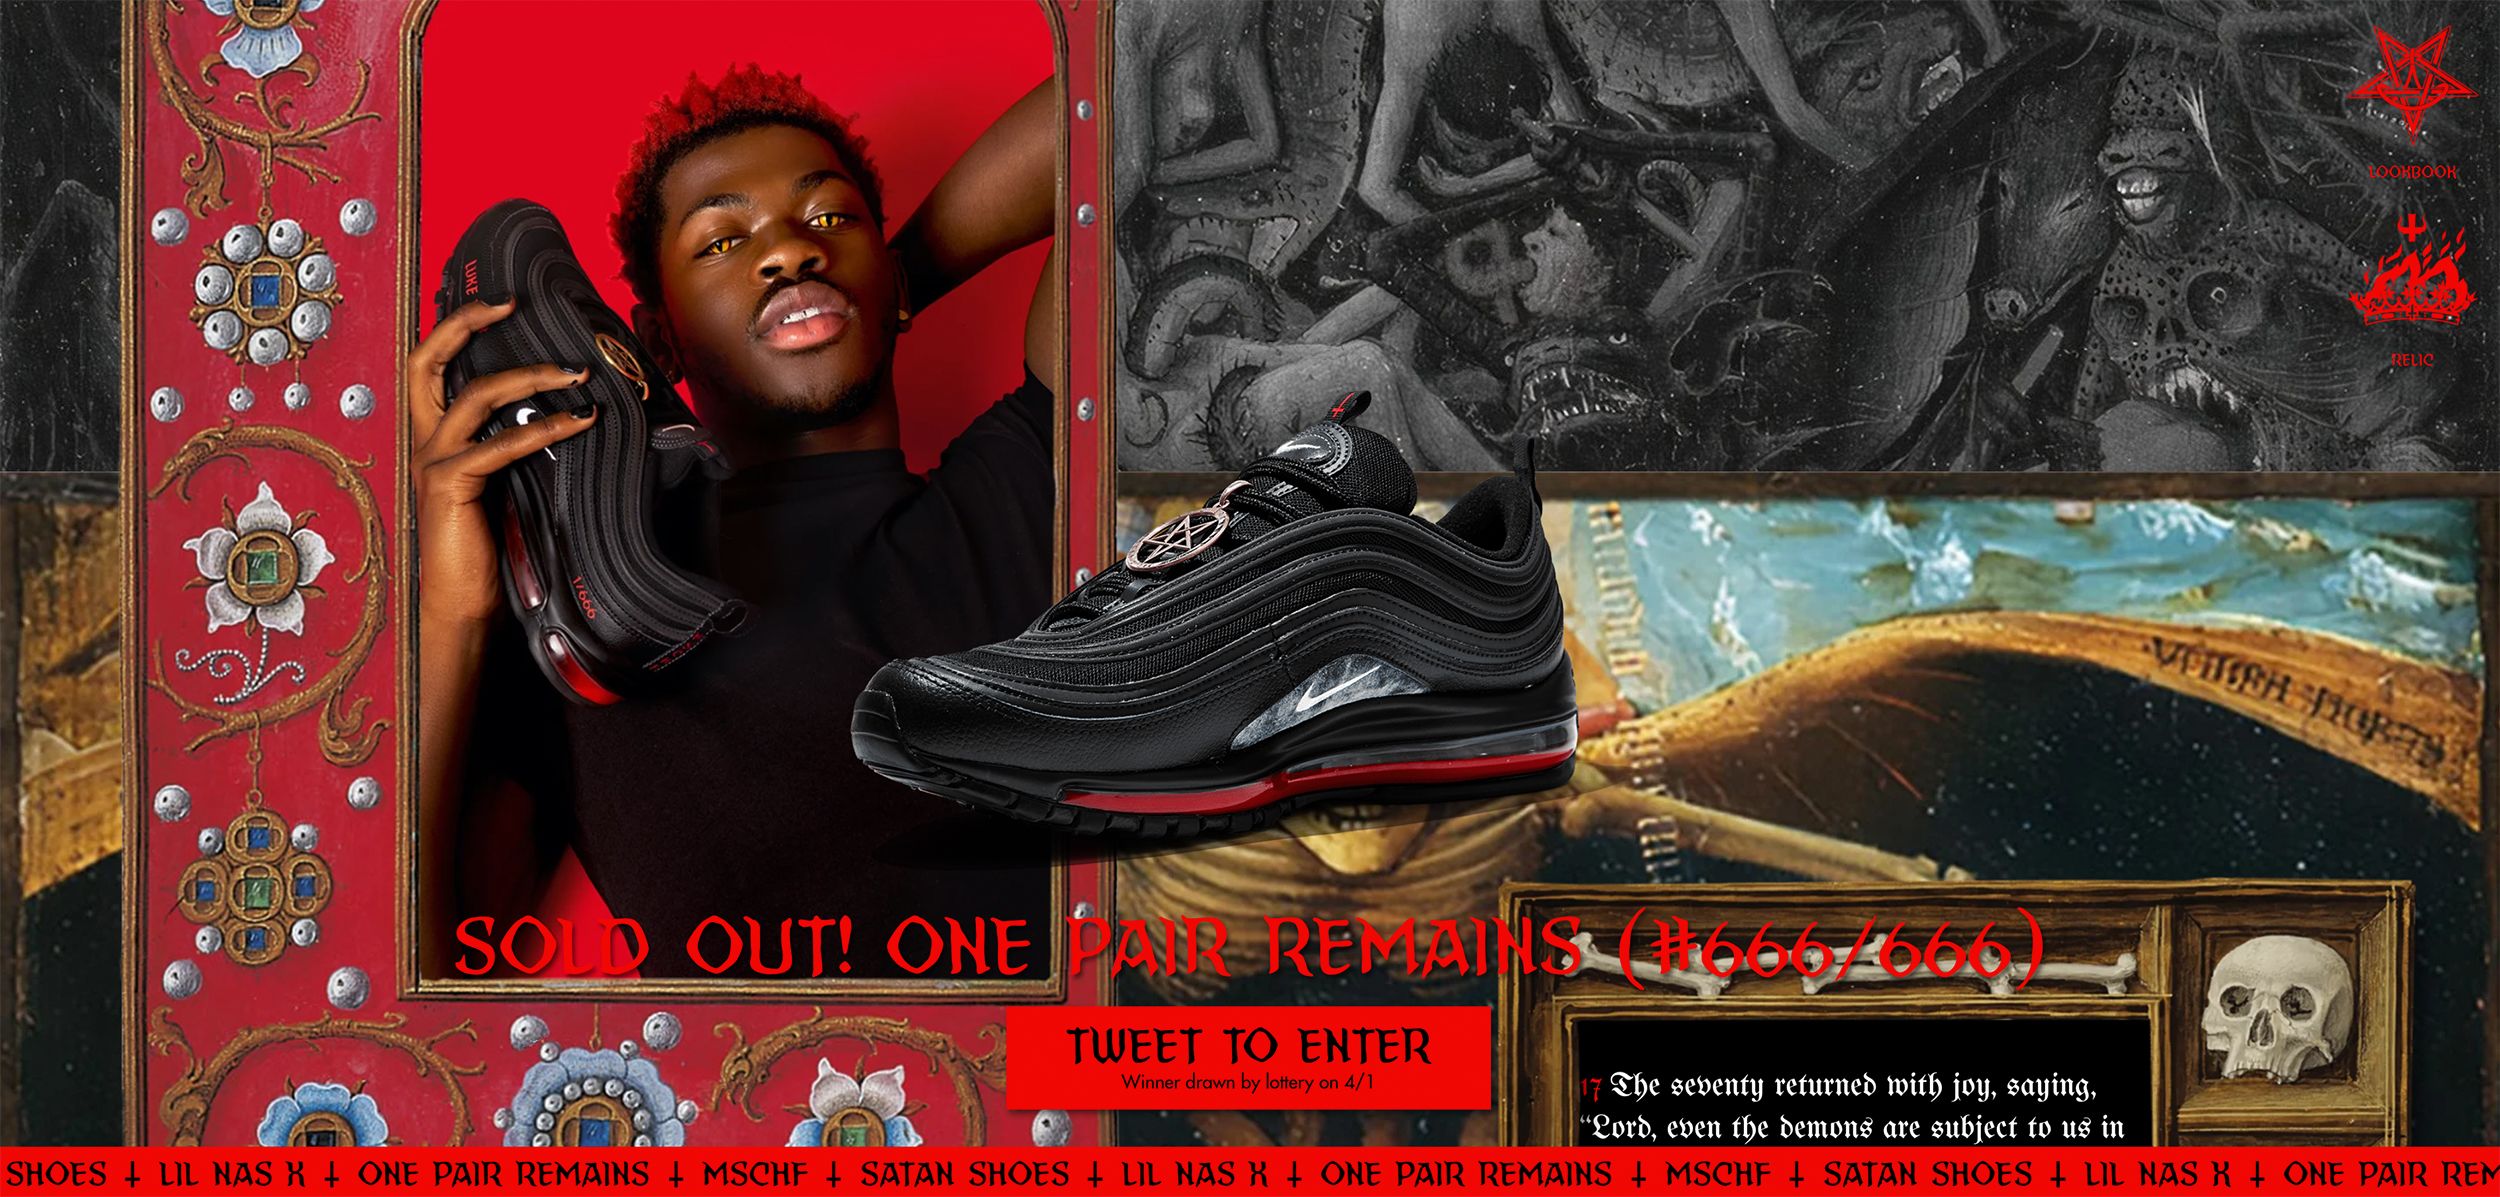 Nike Sues Over 'Satan Shoes' Promoted By Lil Nas X The New York Times ...